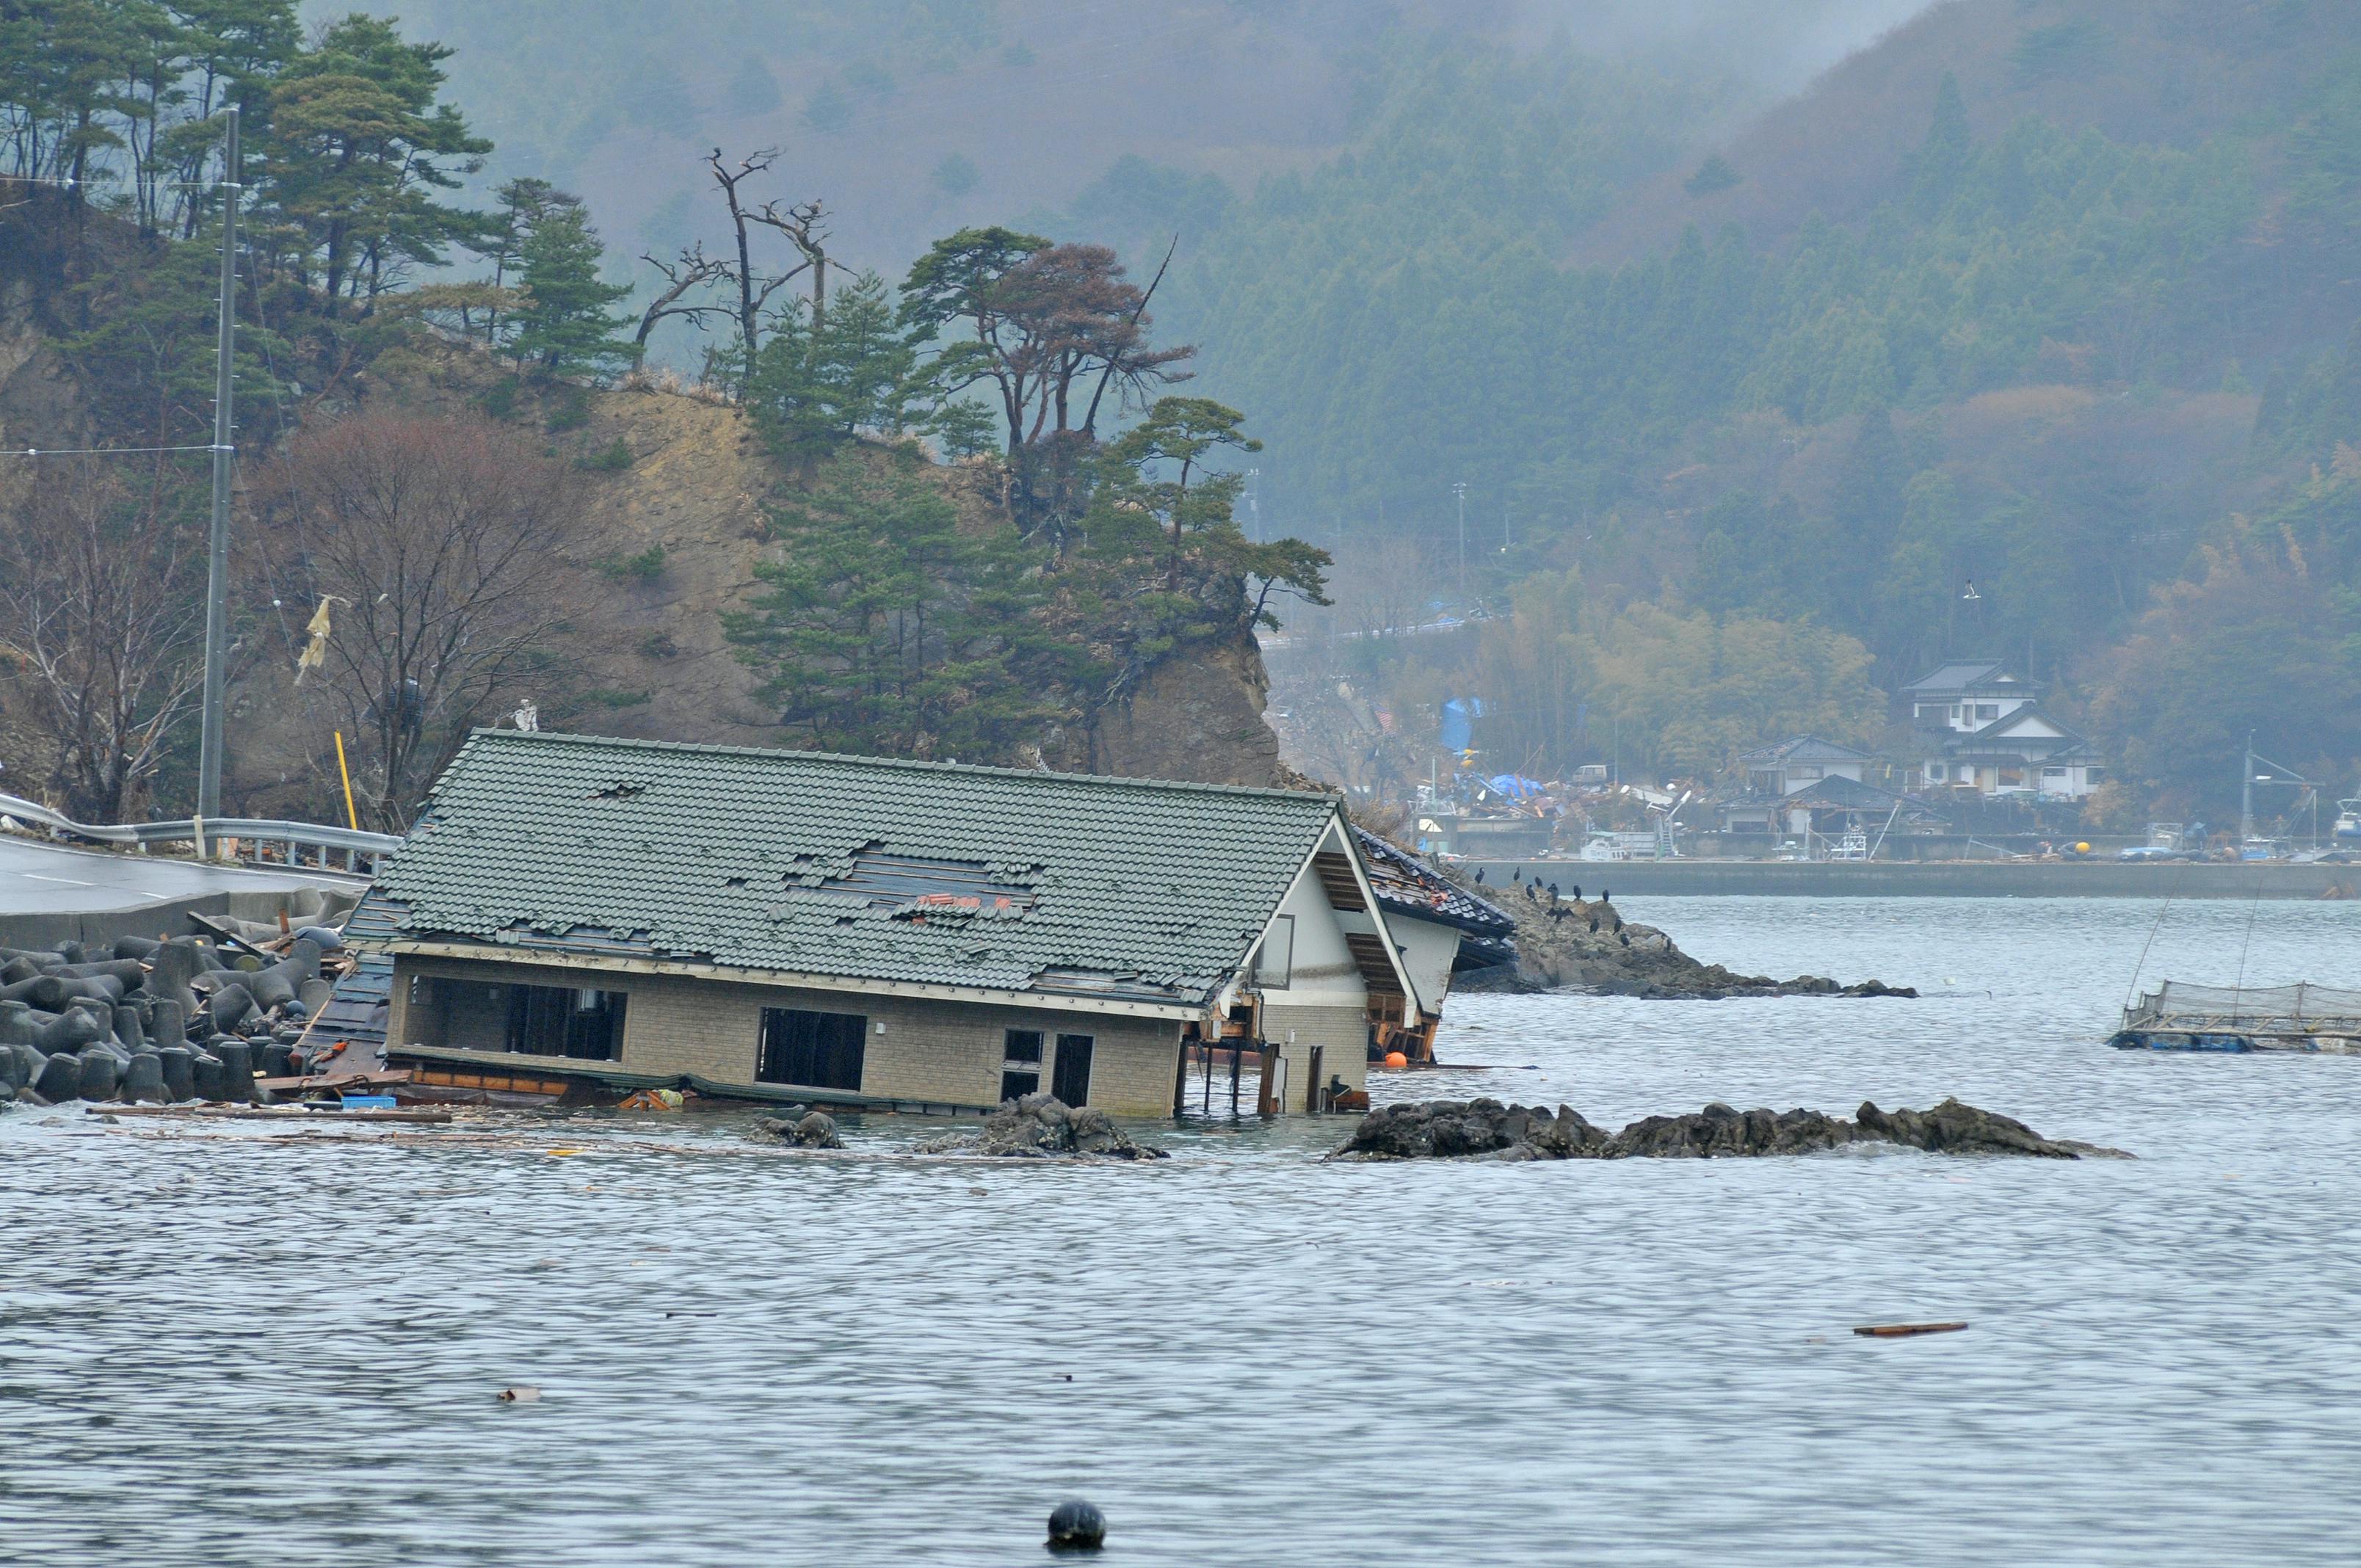 Source: Reality of the tsunami disaster and the aftermath of the 2011 Tohoku earthquake and tsunami.jpg and the outbreak of the unprecedented Great East Japan Earthquake and tsunami.jpg